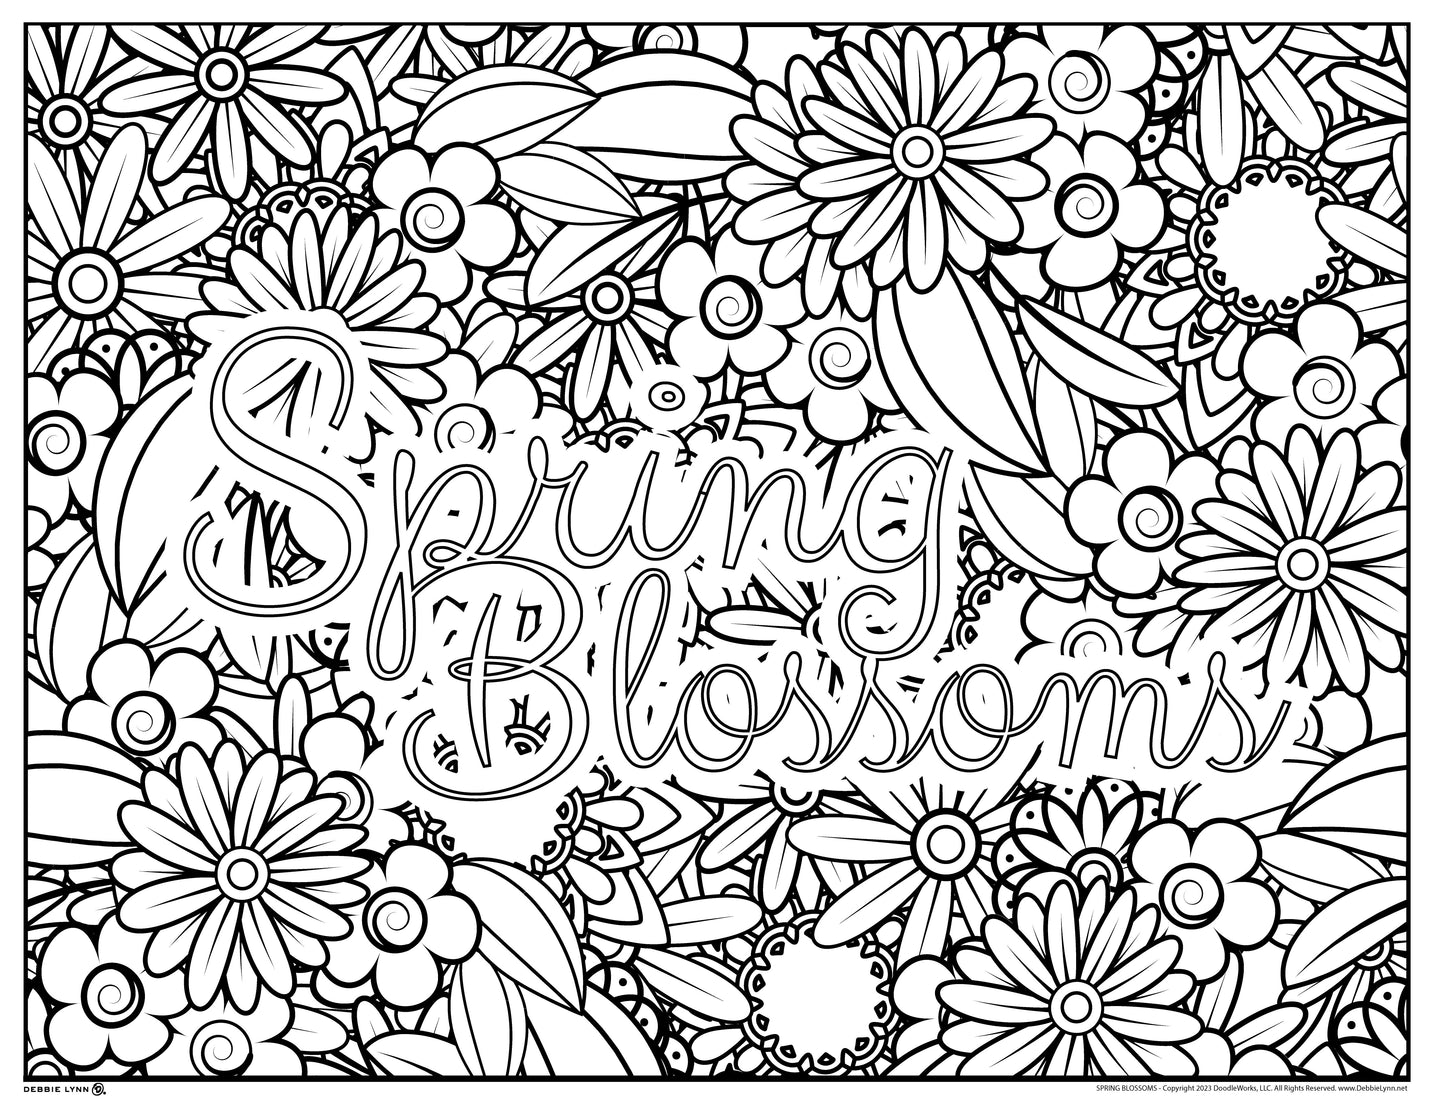 Spring Blossoms Personalized Giant Coloring Poster 46"x60"